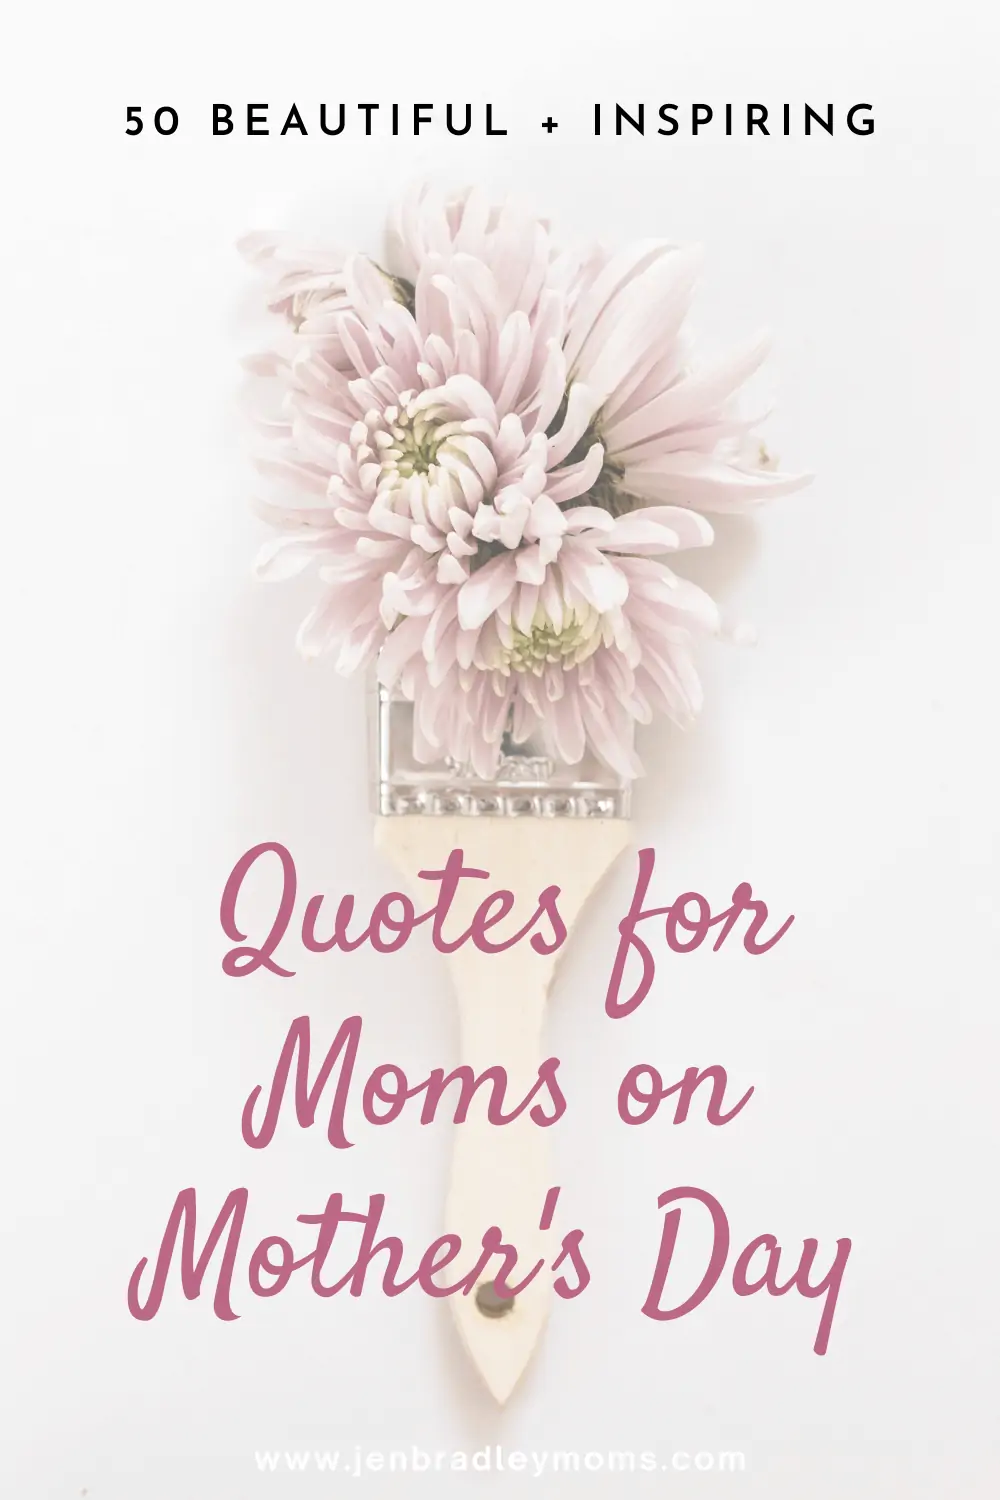 55+ Beautiful and Inspirational Quotes for Mothers